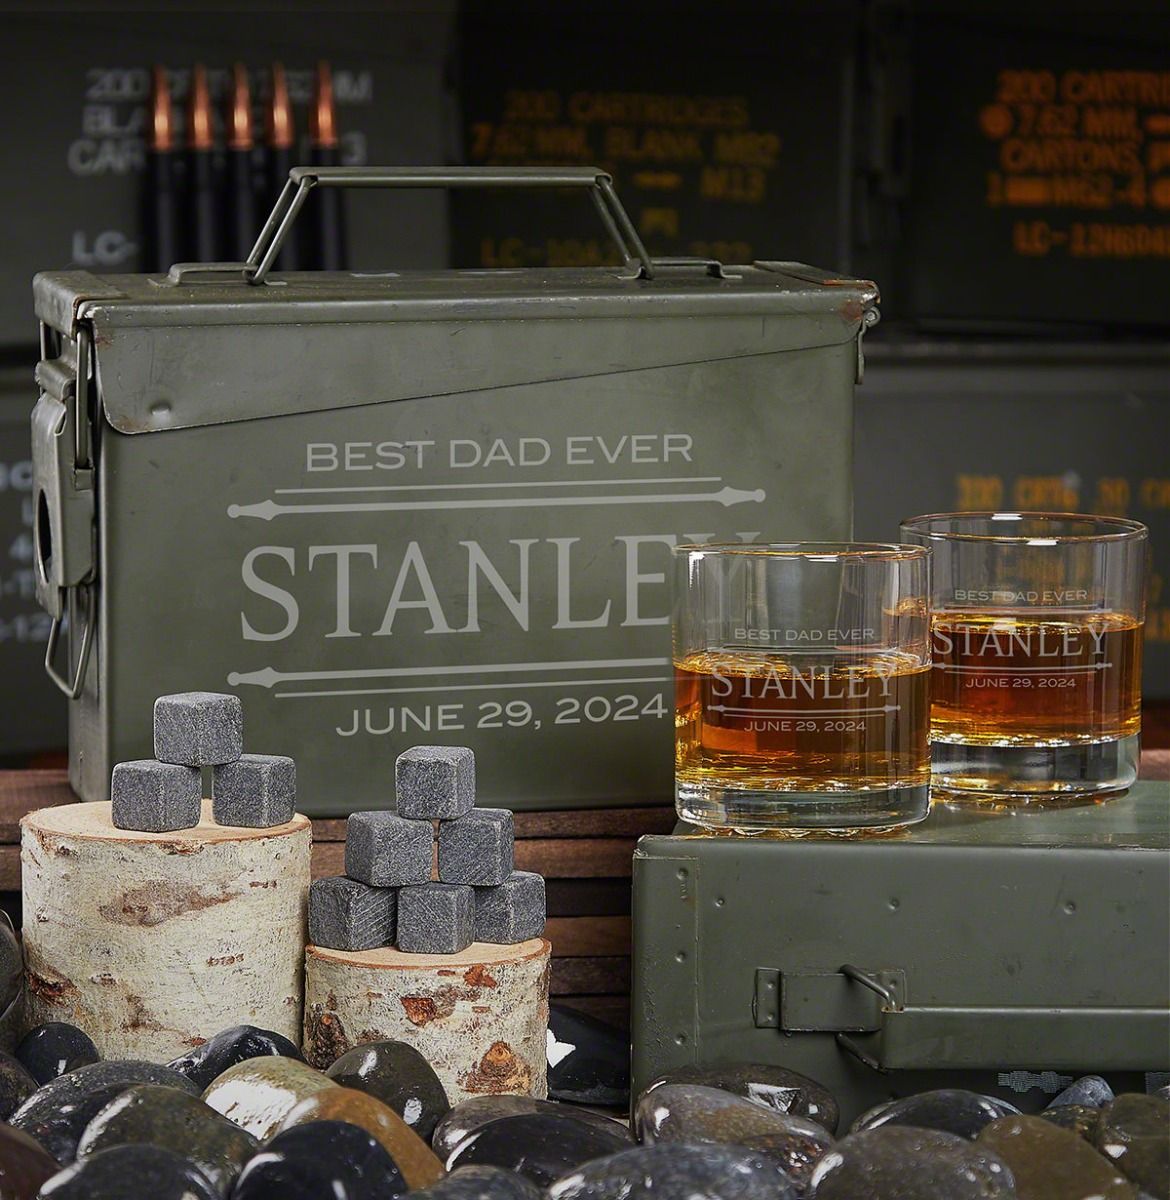 https://images.homewetbar.com/media/catalog/product/7/3/7342-stanford-whiskey-lover-ammo-can-set-up-9-23.jpg?store=default&image-type=image